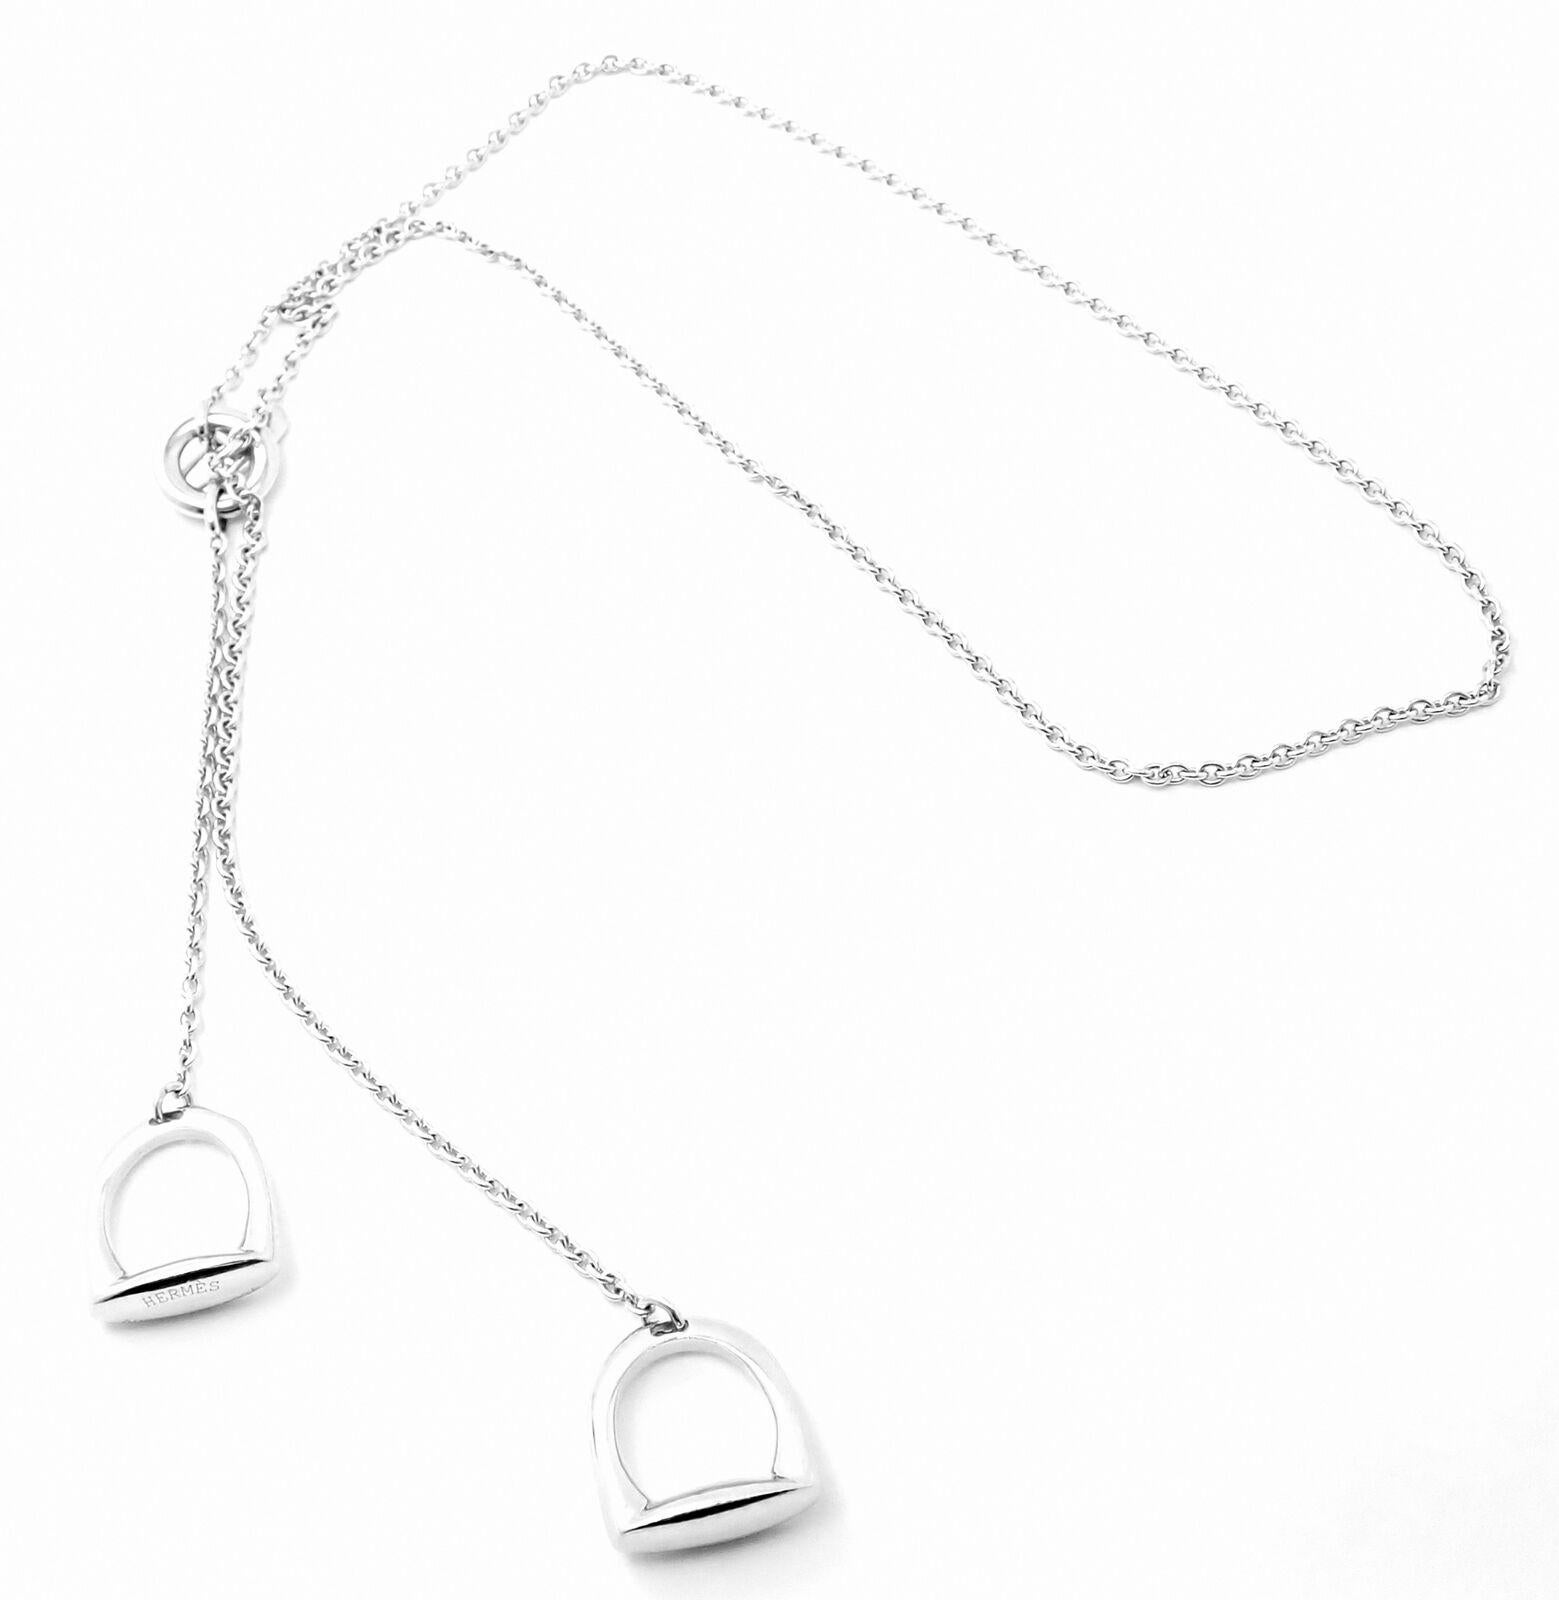 Women's or Men's Hermes Stirrup Lariat White Gold Link Chain Necklace